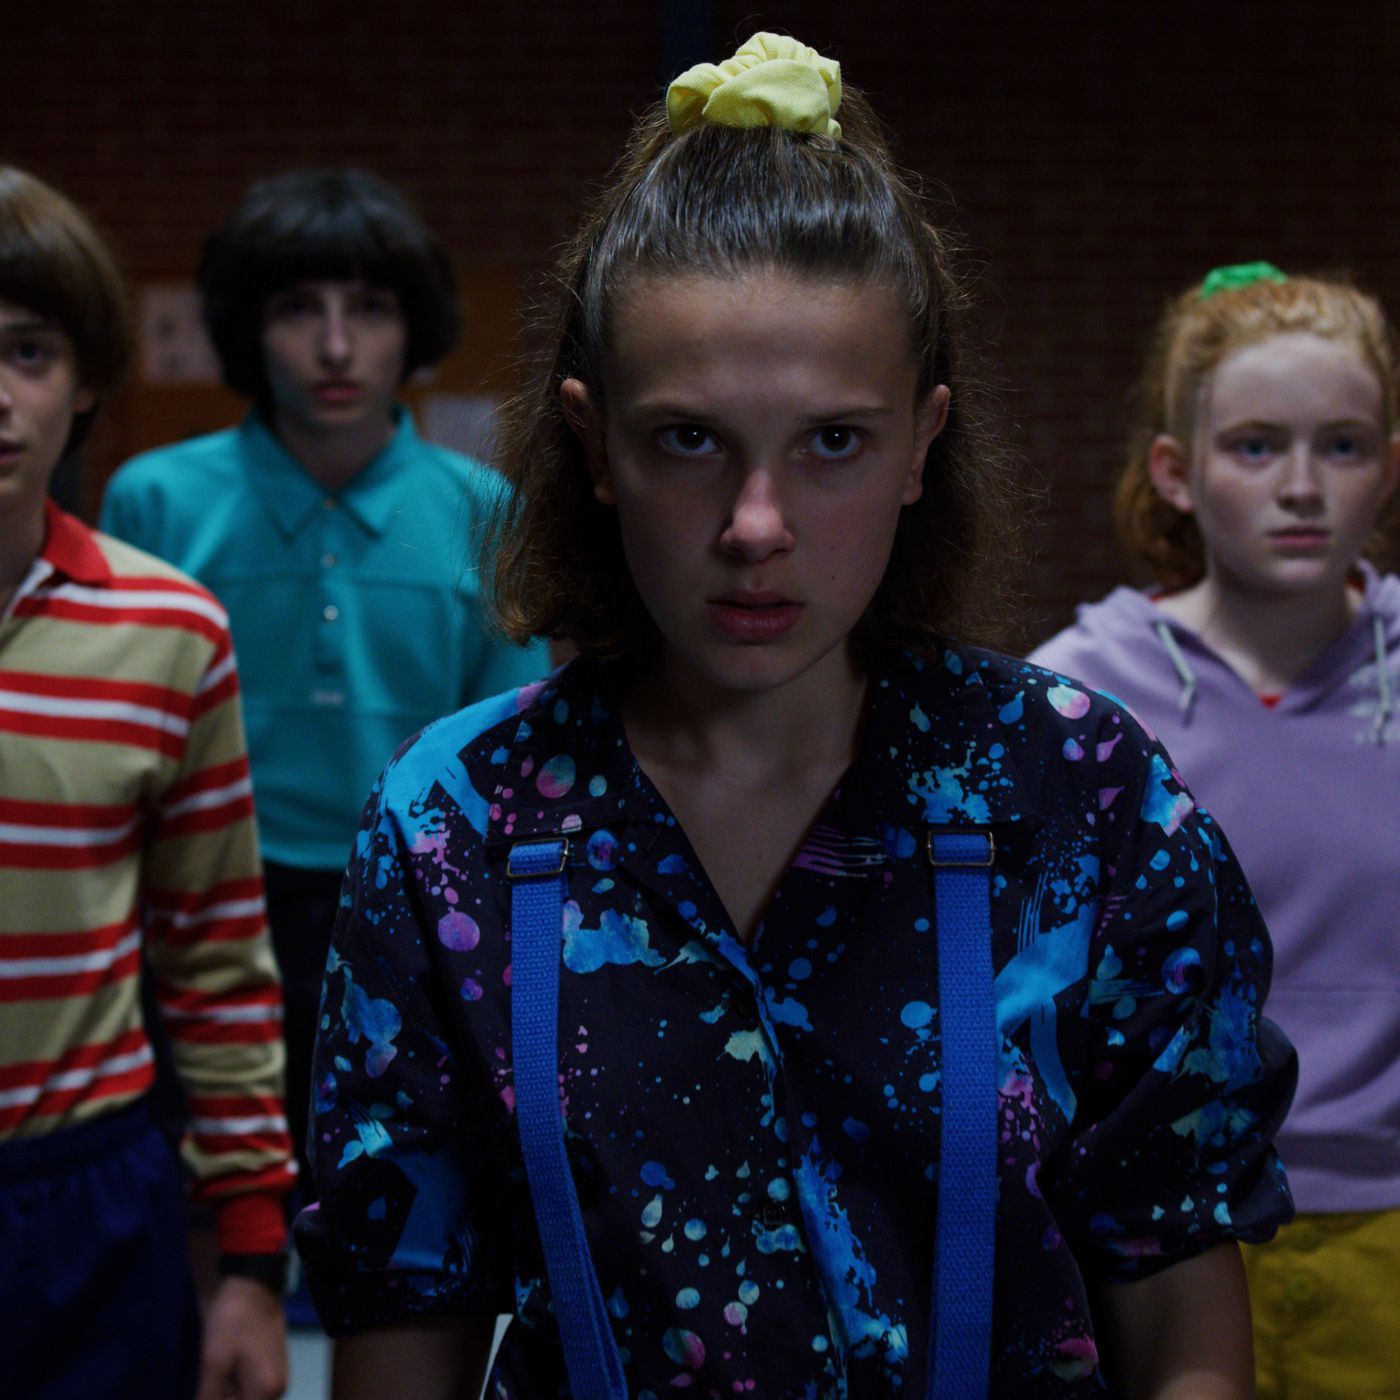 Stranger Things season 3 goes full Aliens with its action